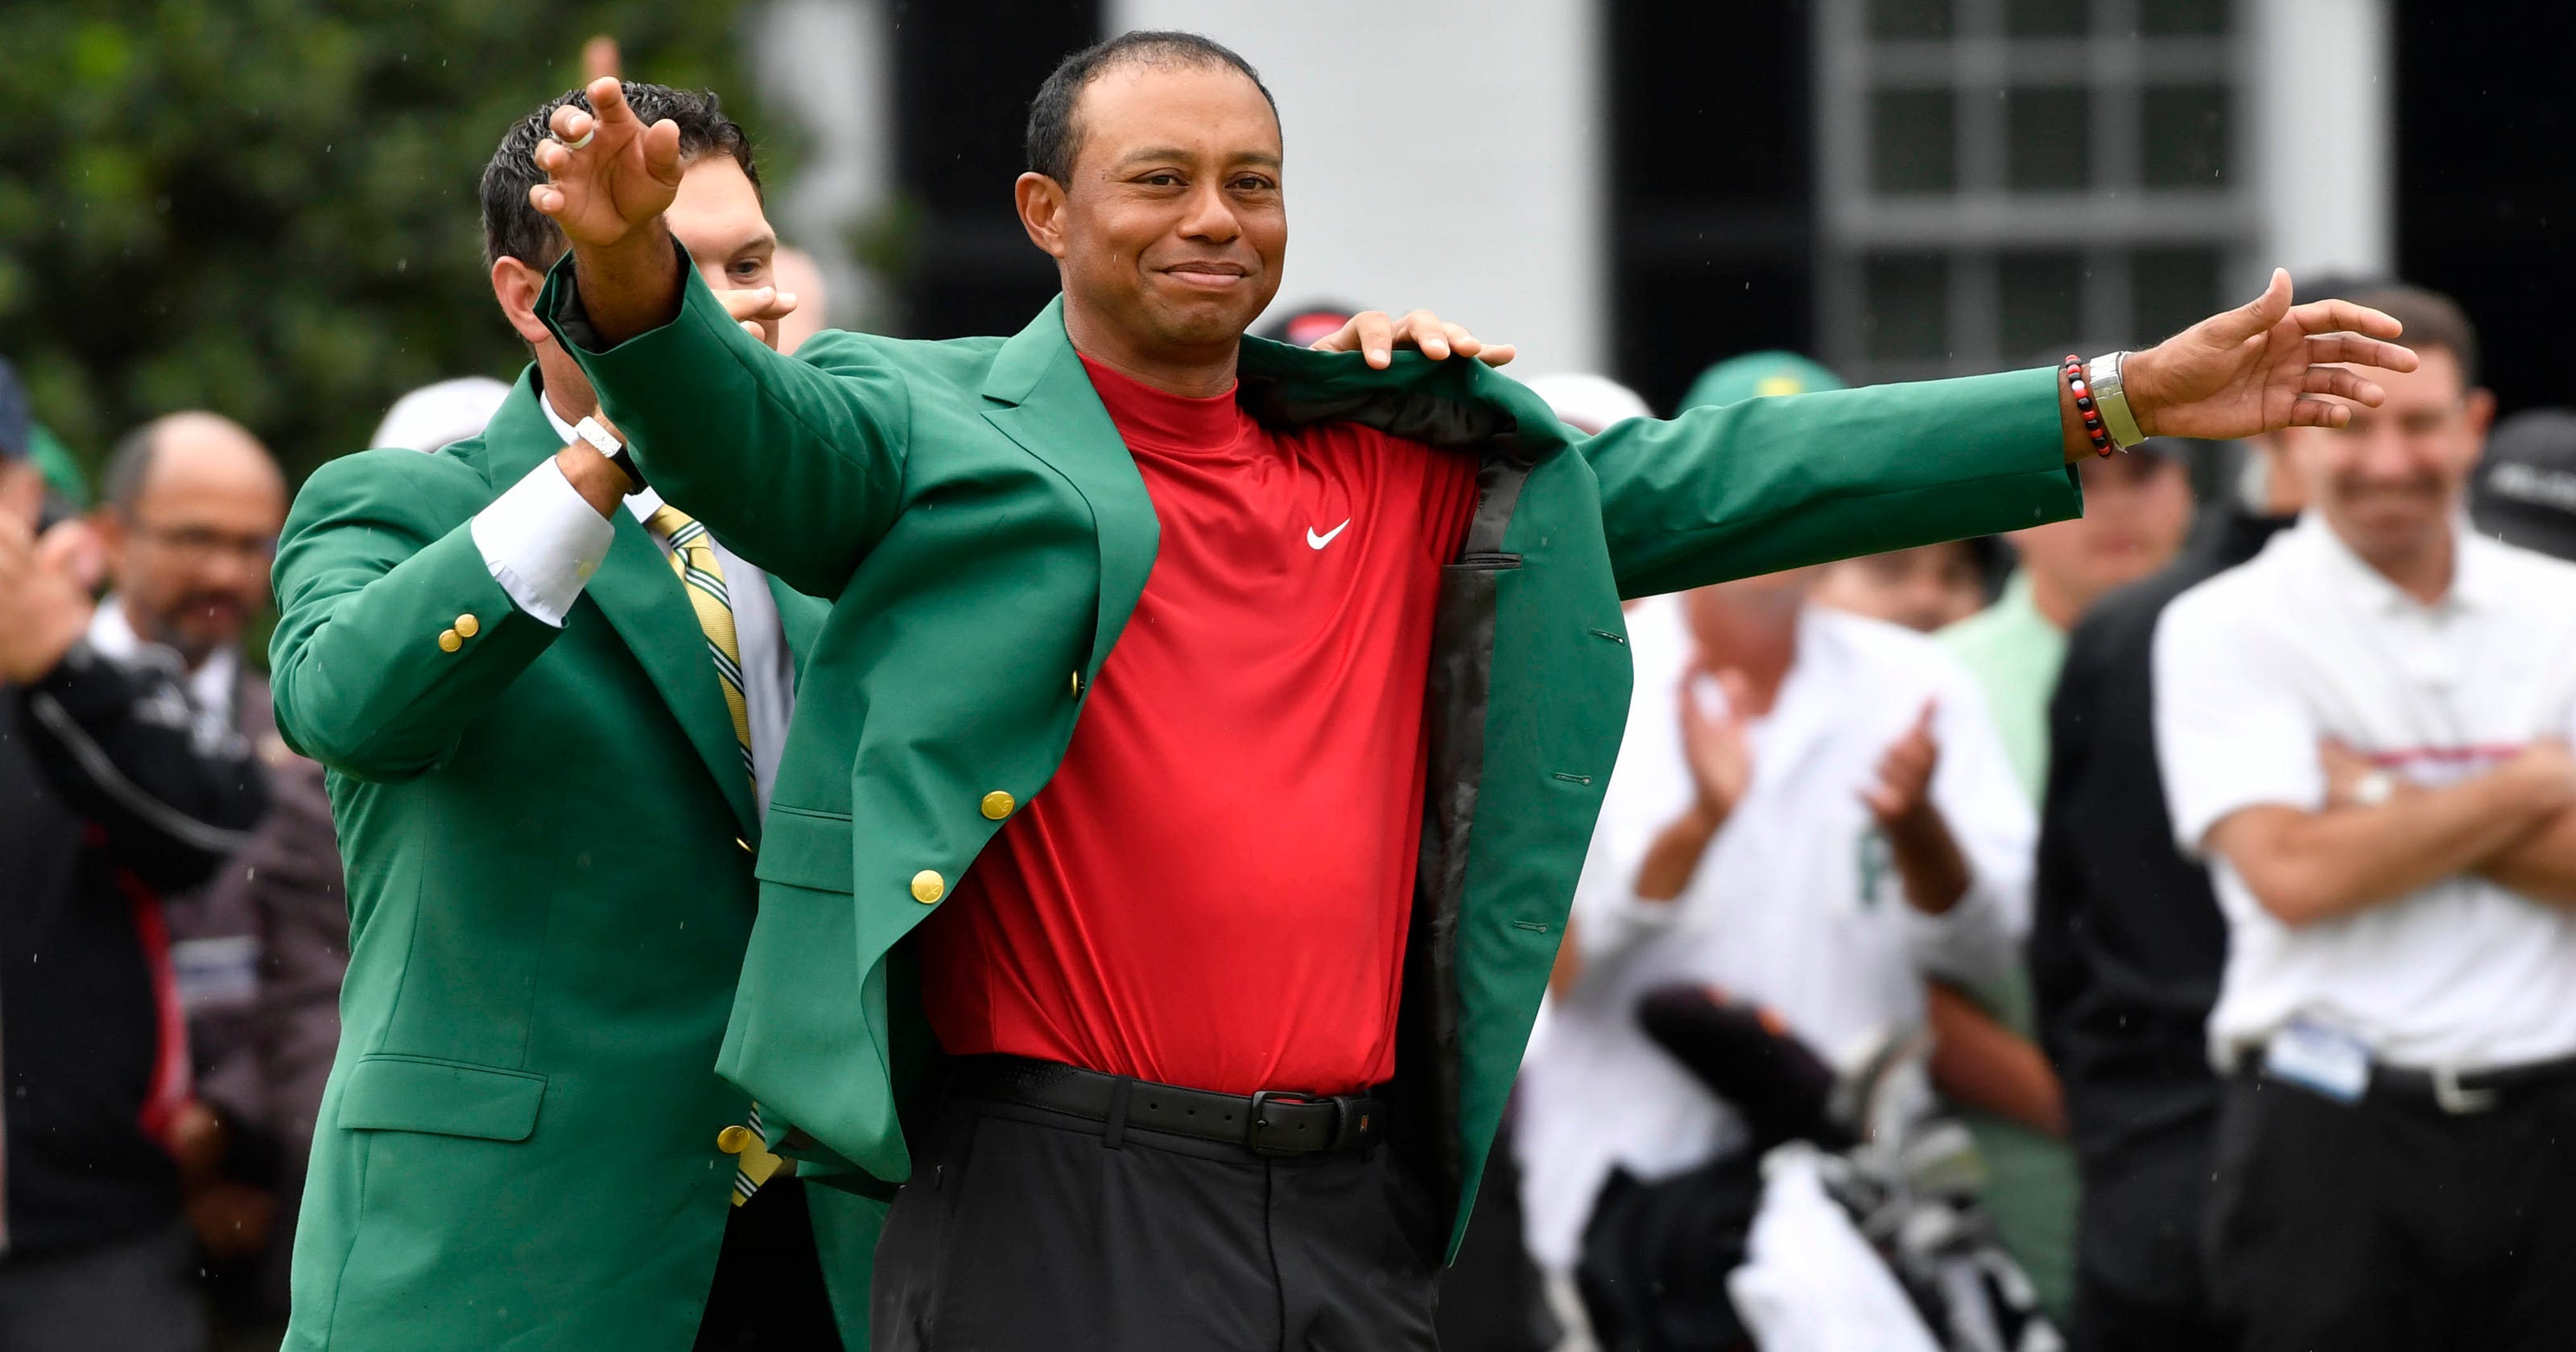 The 2019 Masters at Augusta National